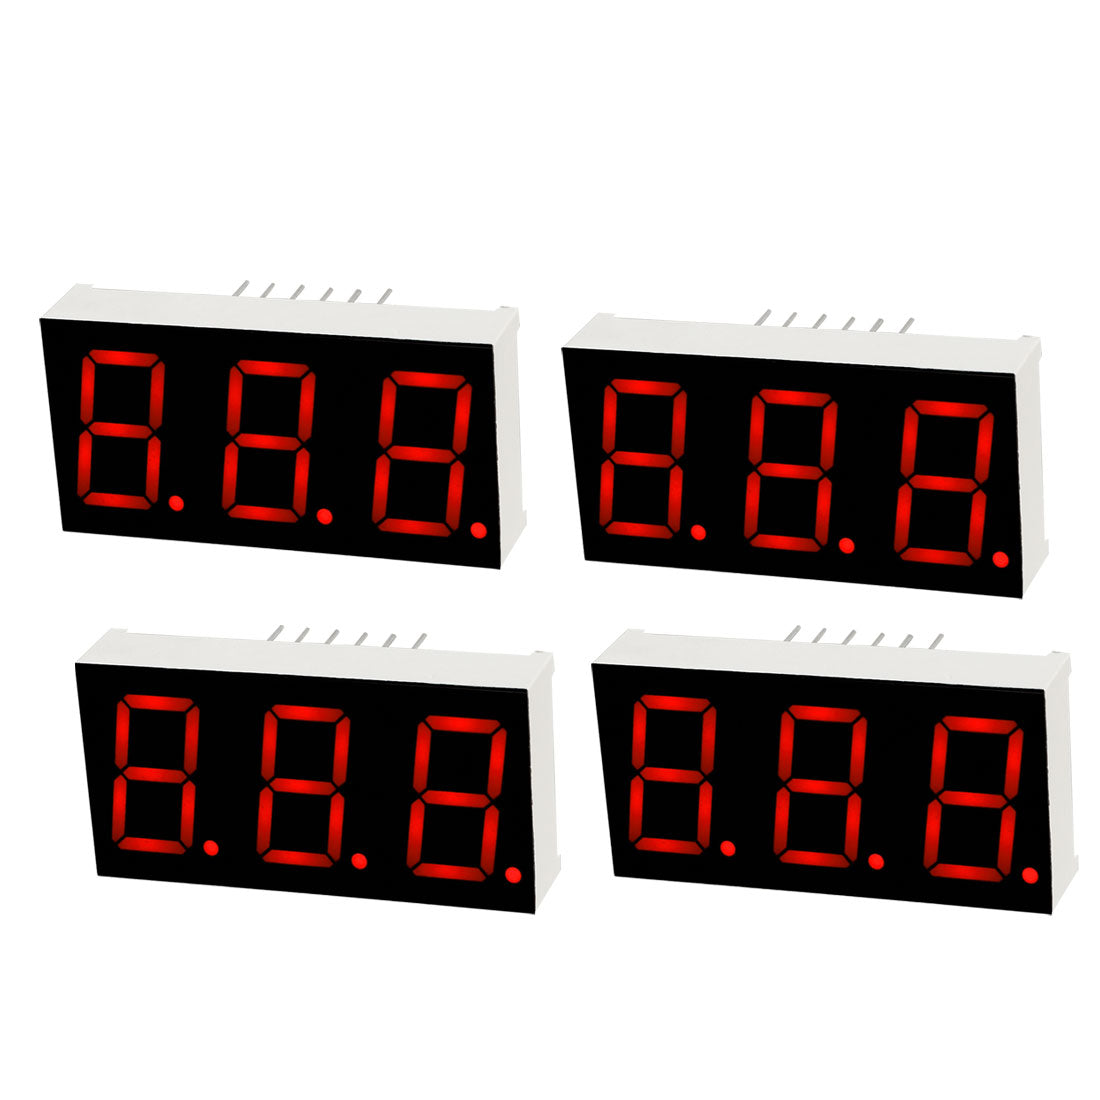 Uxcell Uxcell Common Cathode 12 Pin 3 Bit 7 Segment 1.48 x 0.75 x 0.31 Inch 0.55" Red LED Display Digital Tube 3pcs